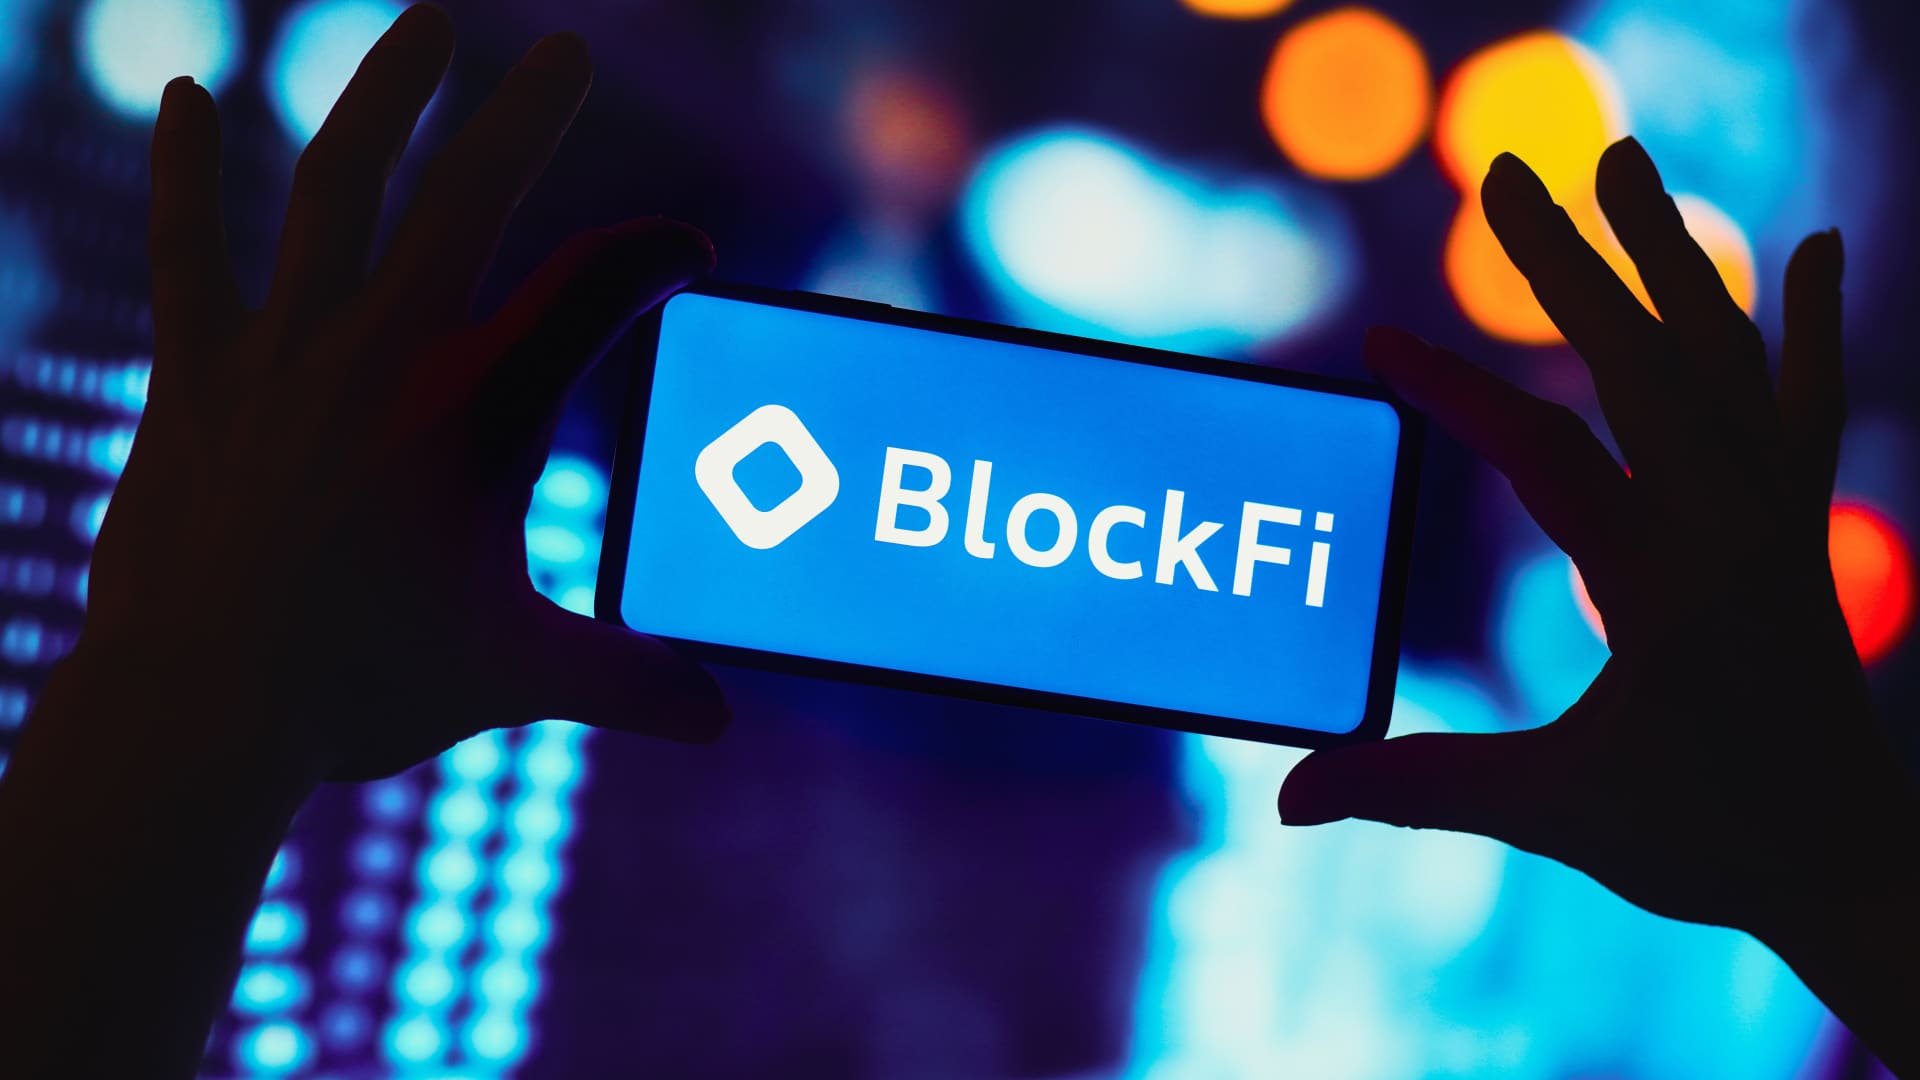 BlockFi lawyer tells bankruptcy court that the priority is to 'maximize client recoveries'